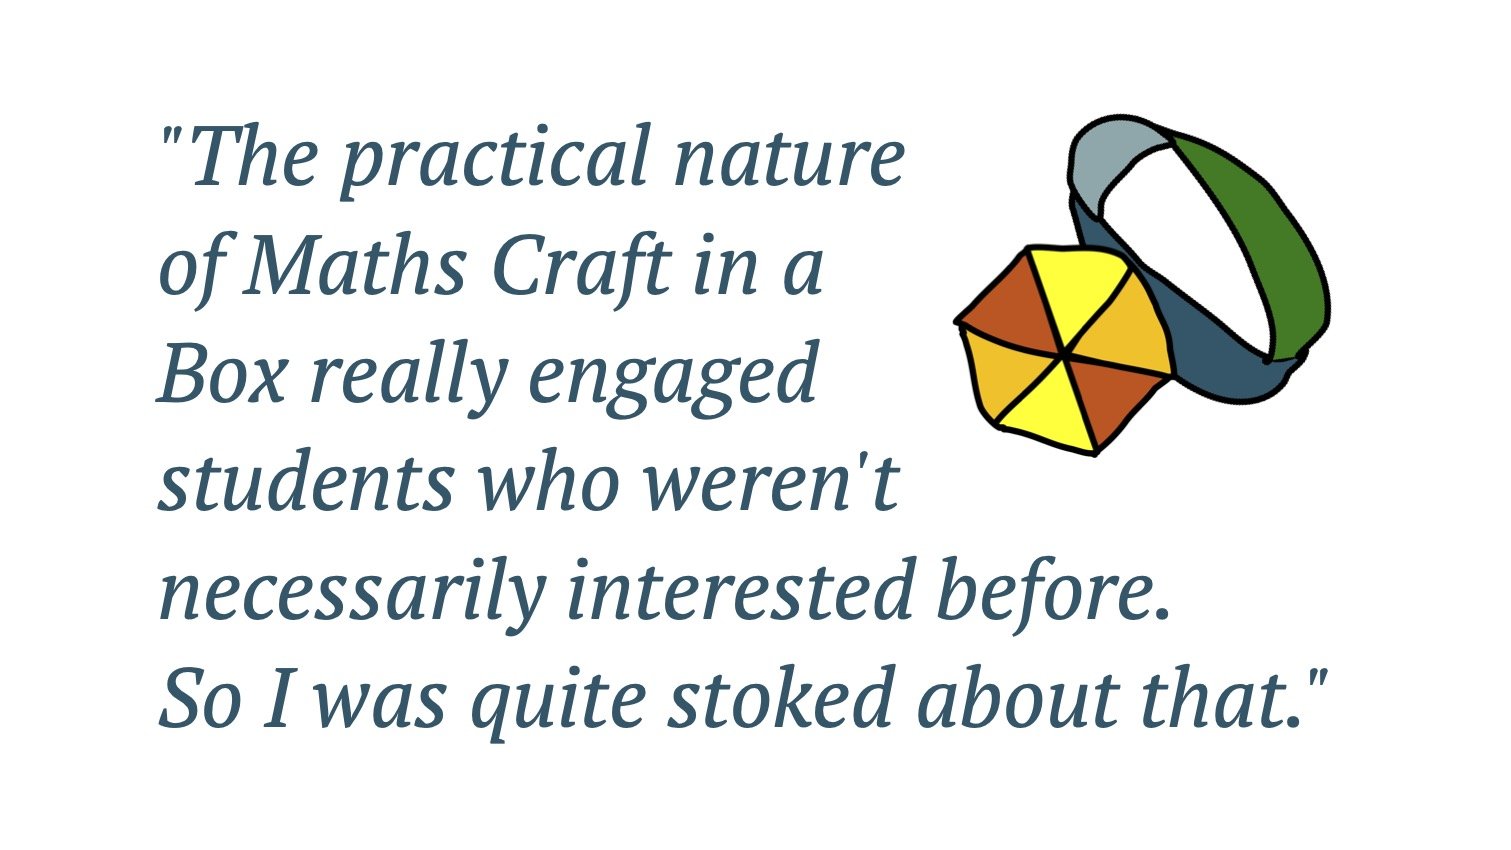 Quote: The practical nature of Maths Craft in a Box really engaged students who weren't necessarily interested before. So I was quite stoked about that.